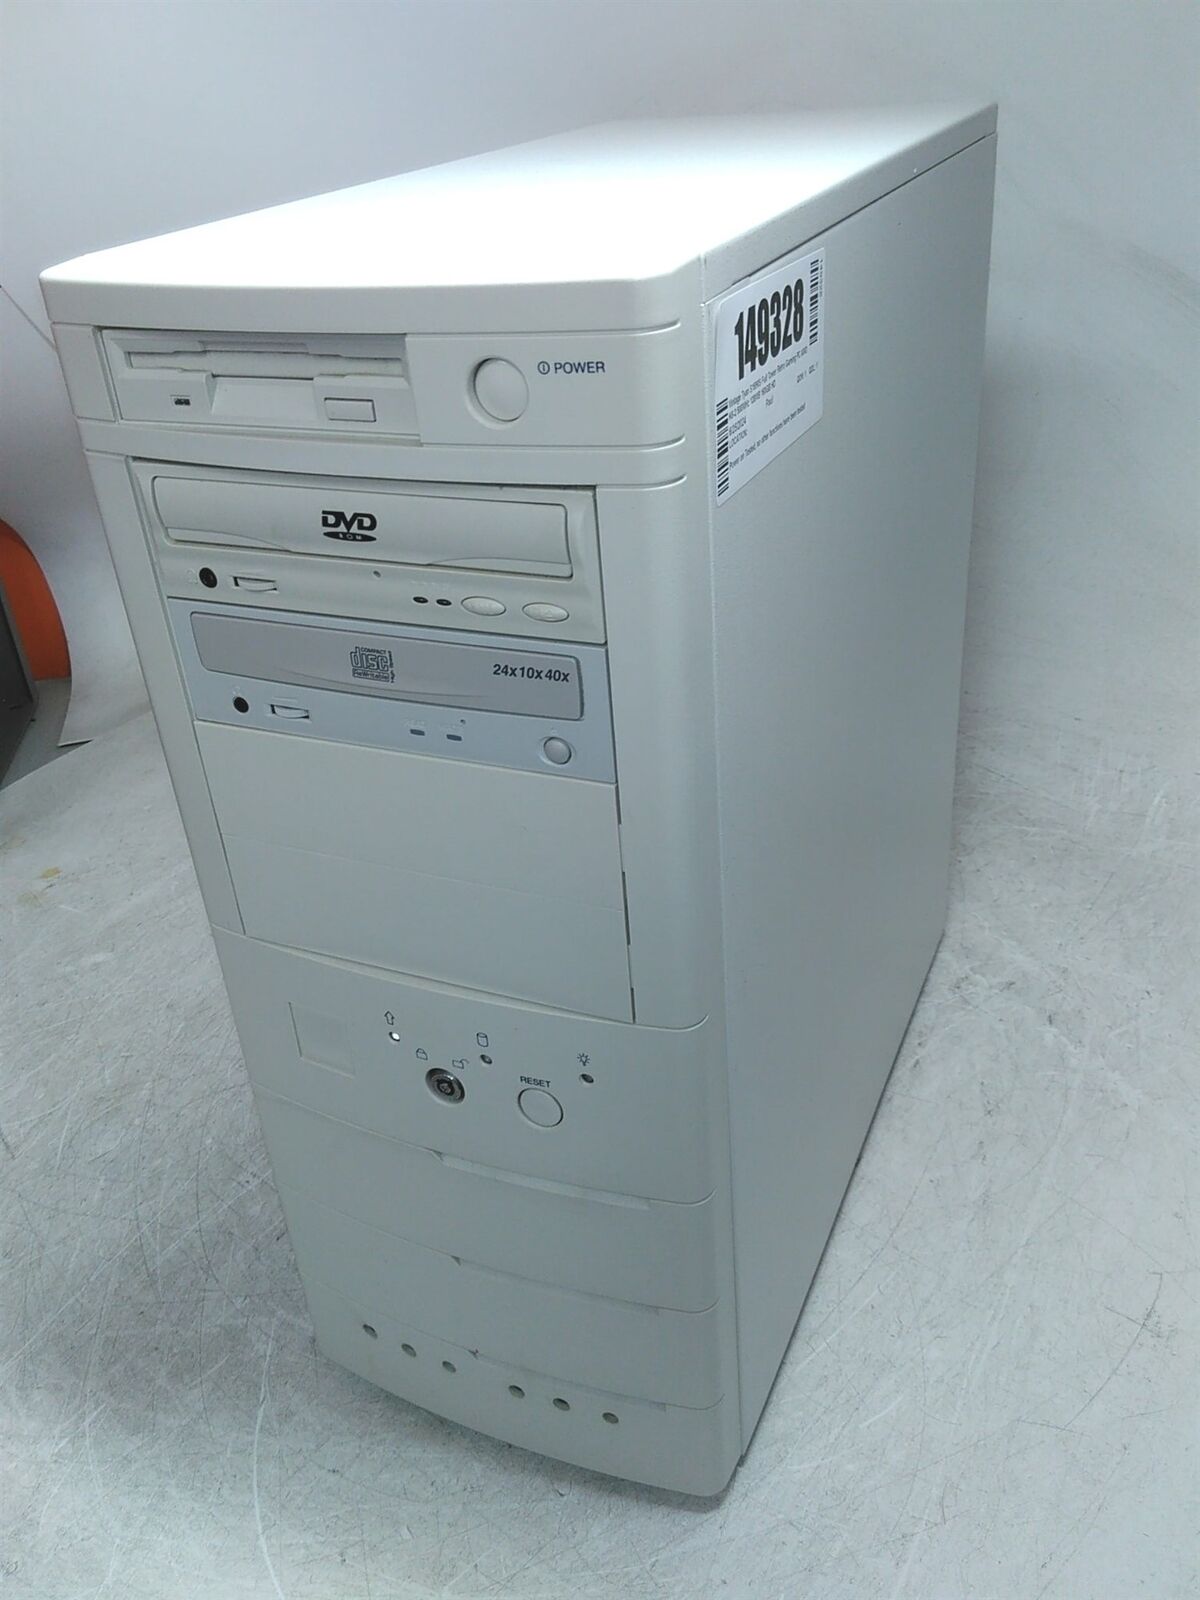 Vintage Tyan S1590S Full Tower Retro Gaming PC AMD K6-2 500MHz 128MB 160GB HD 